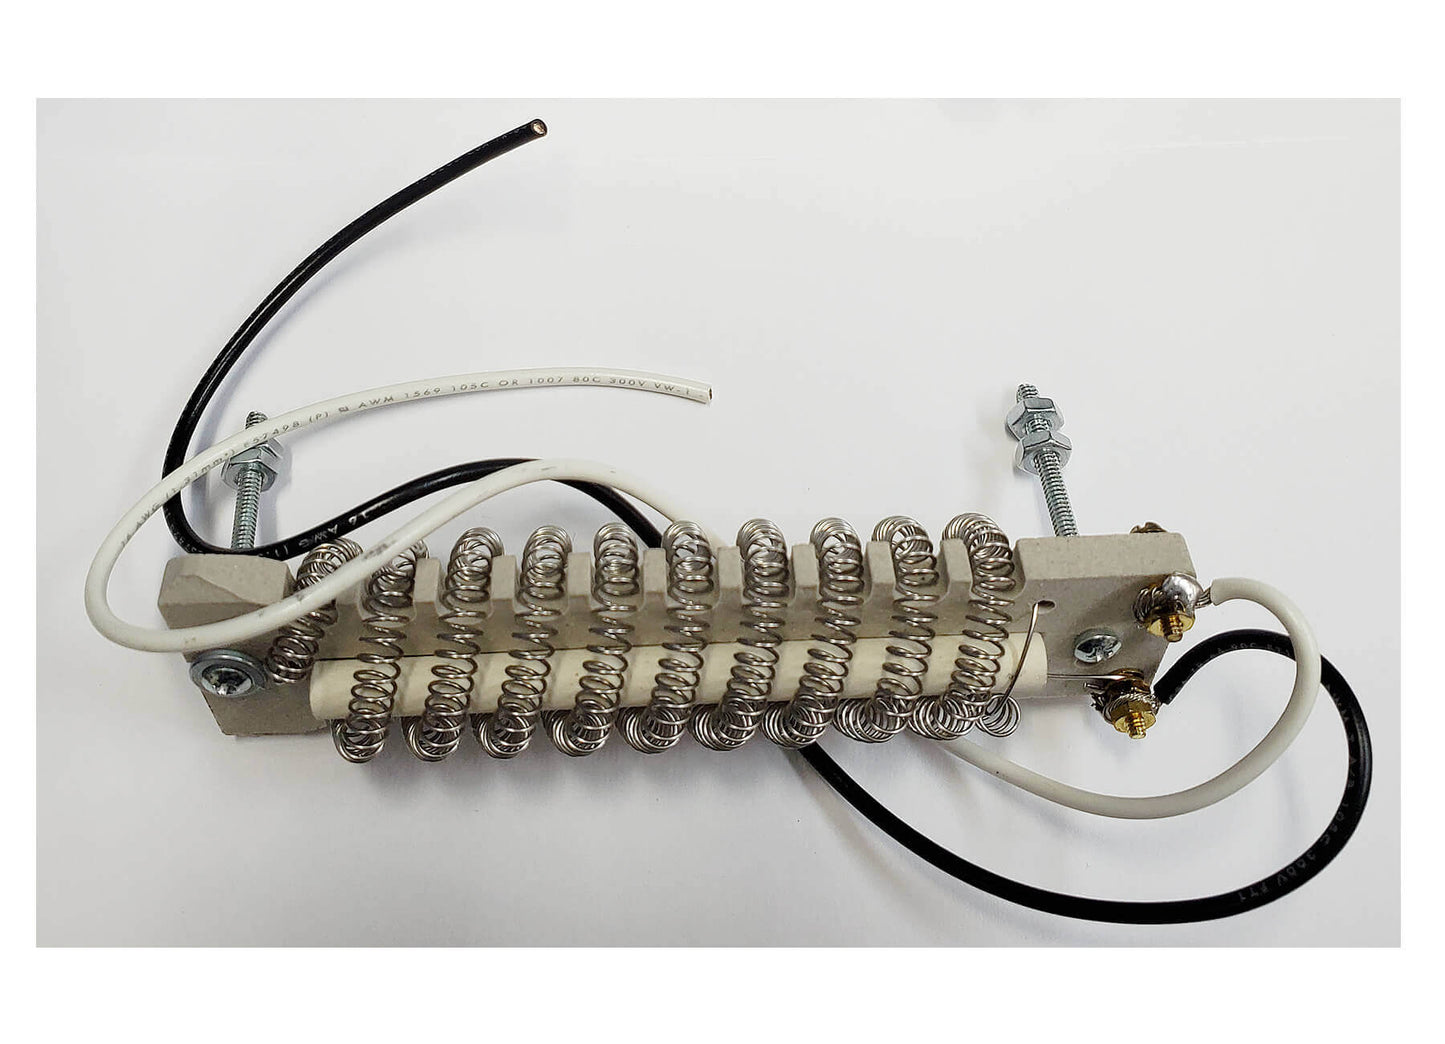 Edemco Dryer Heating Element for F160 Dryer-Pet's Choice Supply